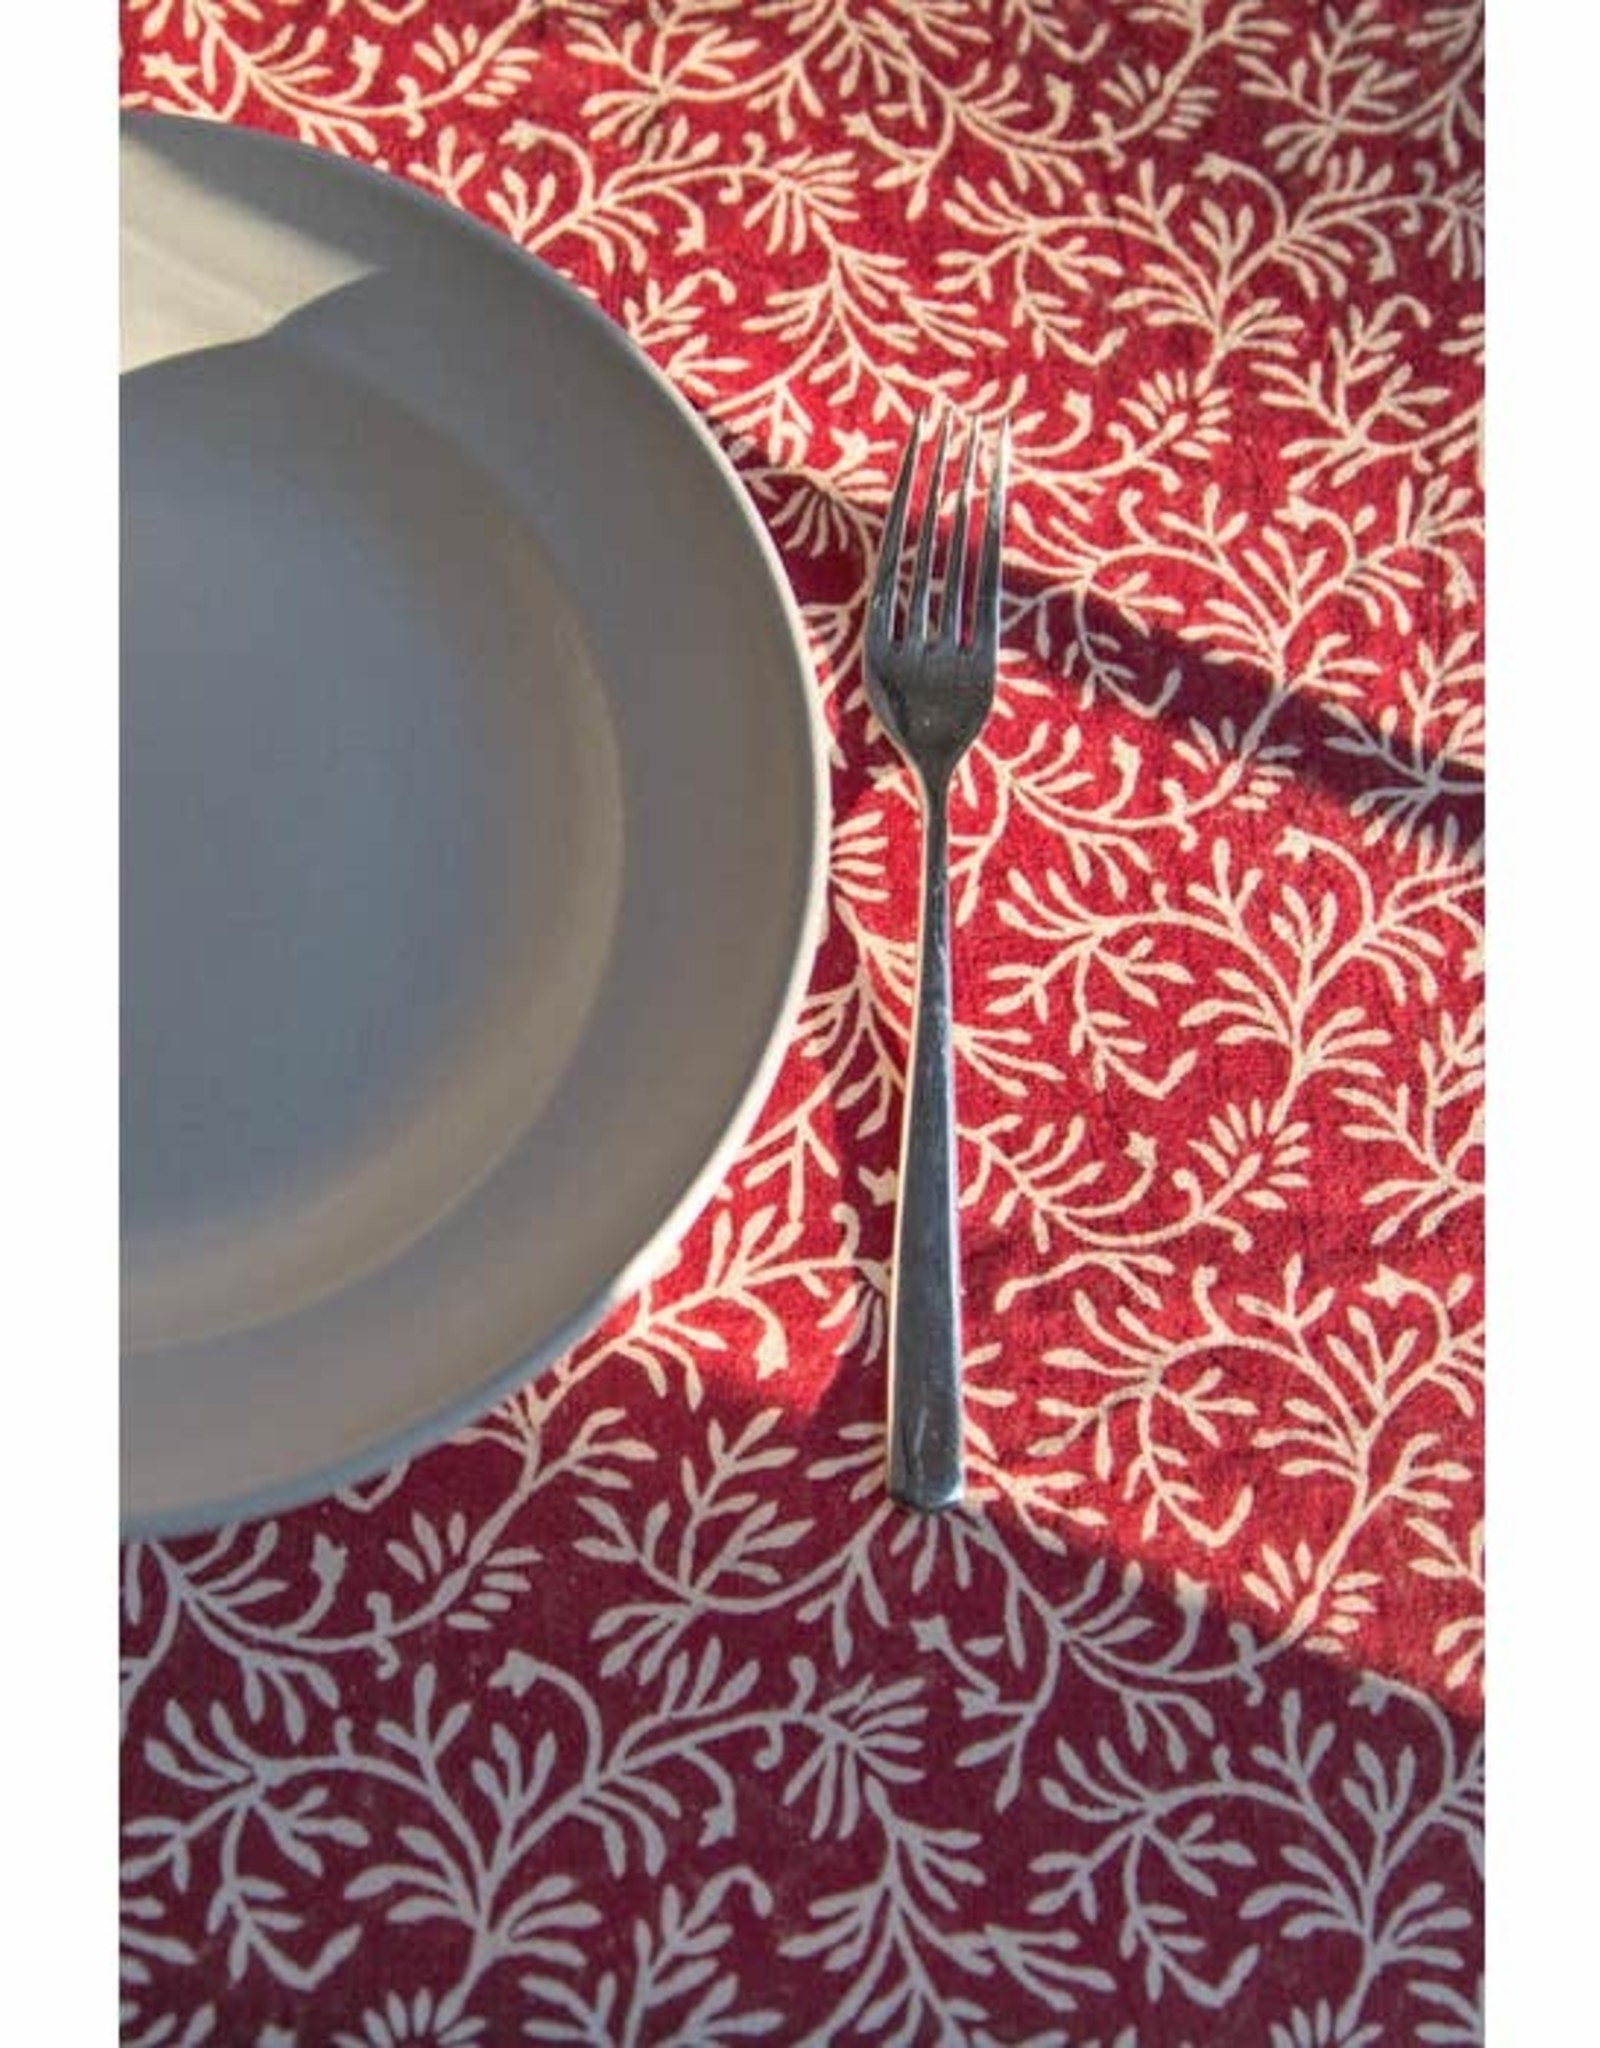 Ten Thousand Villages Red Vines Tablecloth 70x120in